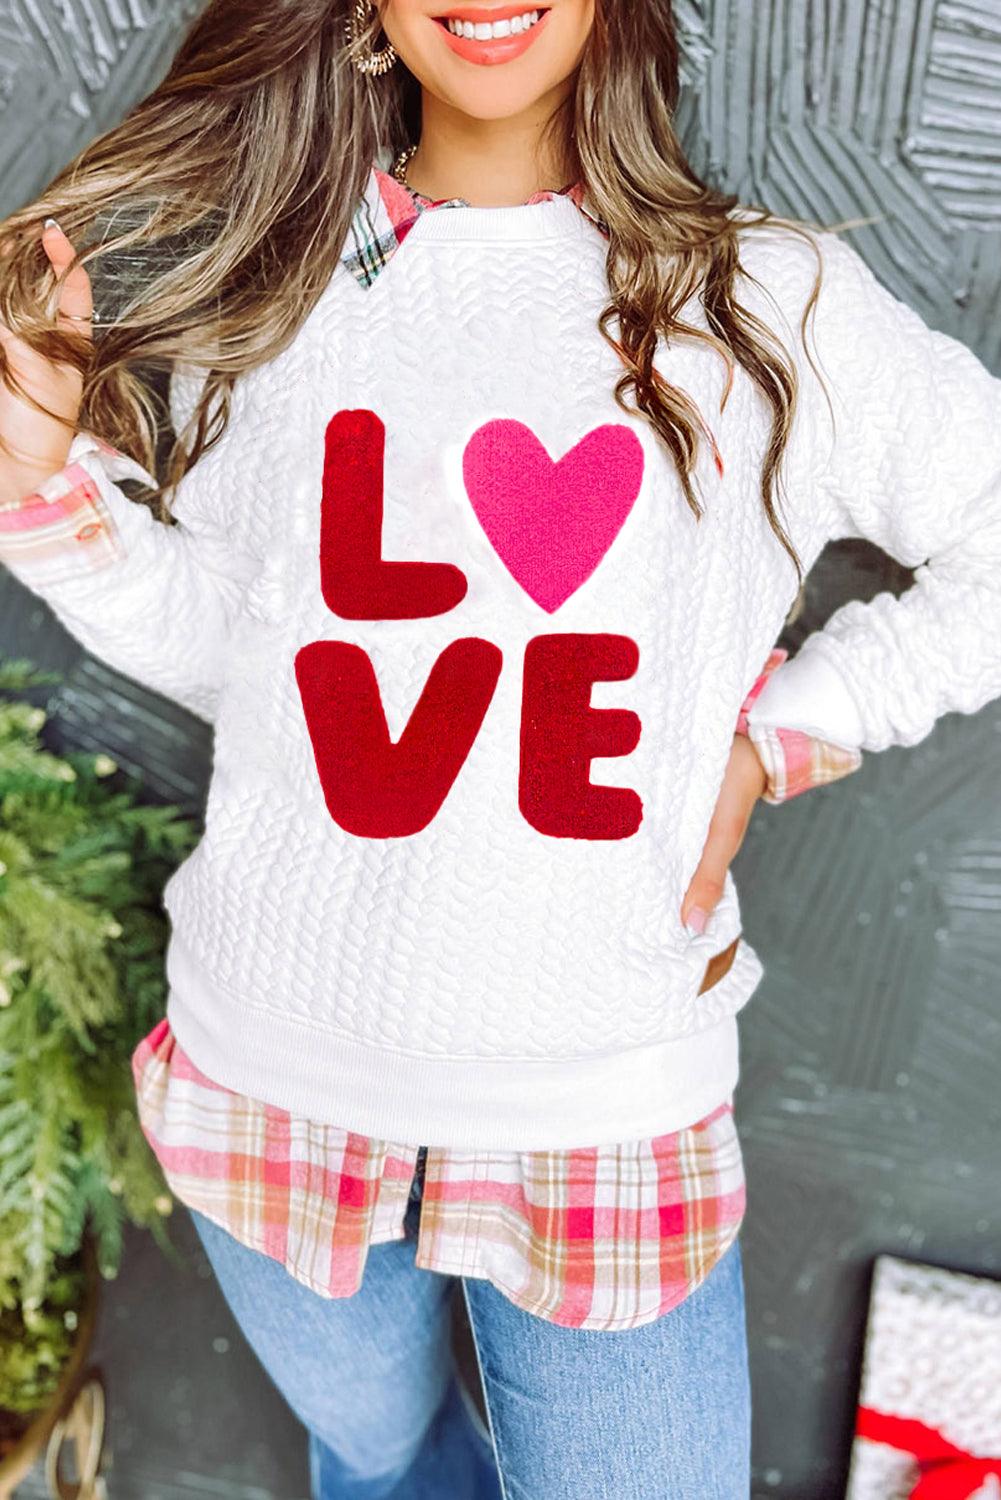 White Merry And Bright Cable Knit Pullover Sweatshirt - L & M Kee, LLC